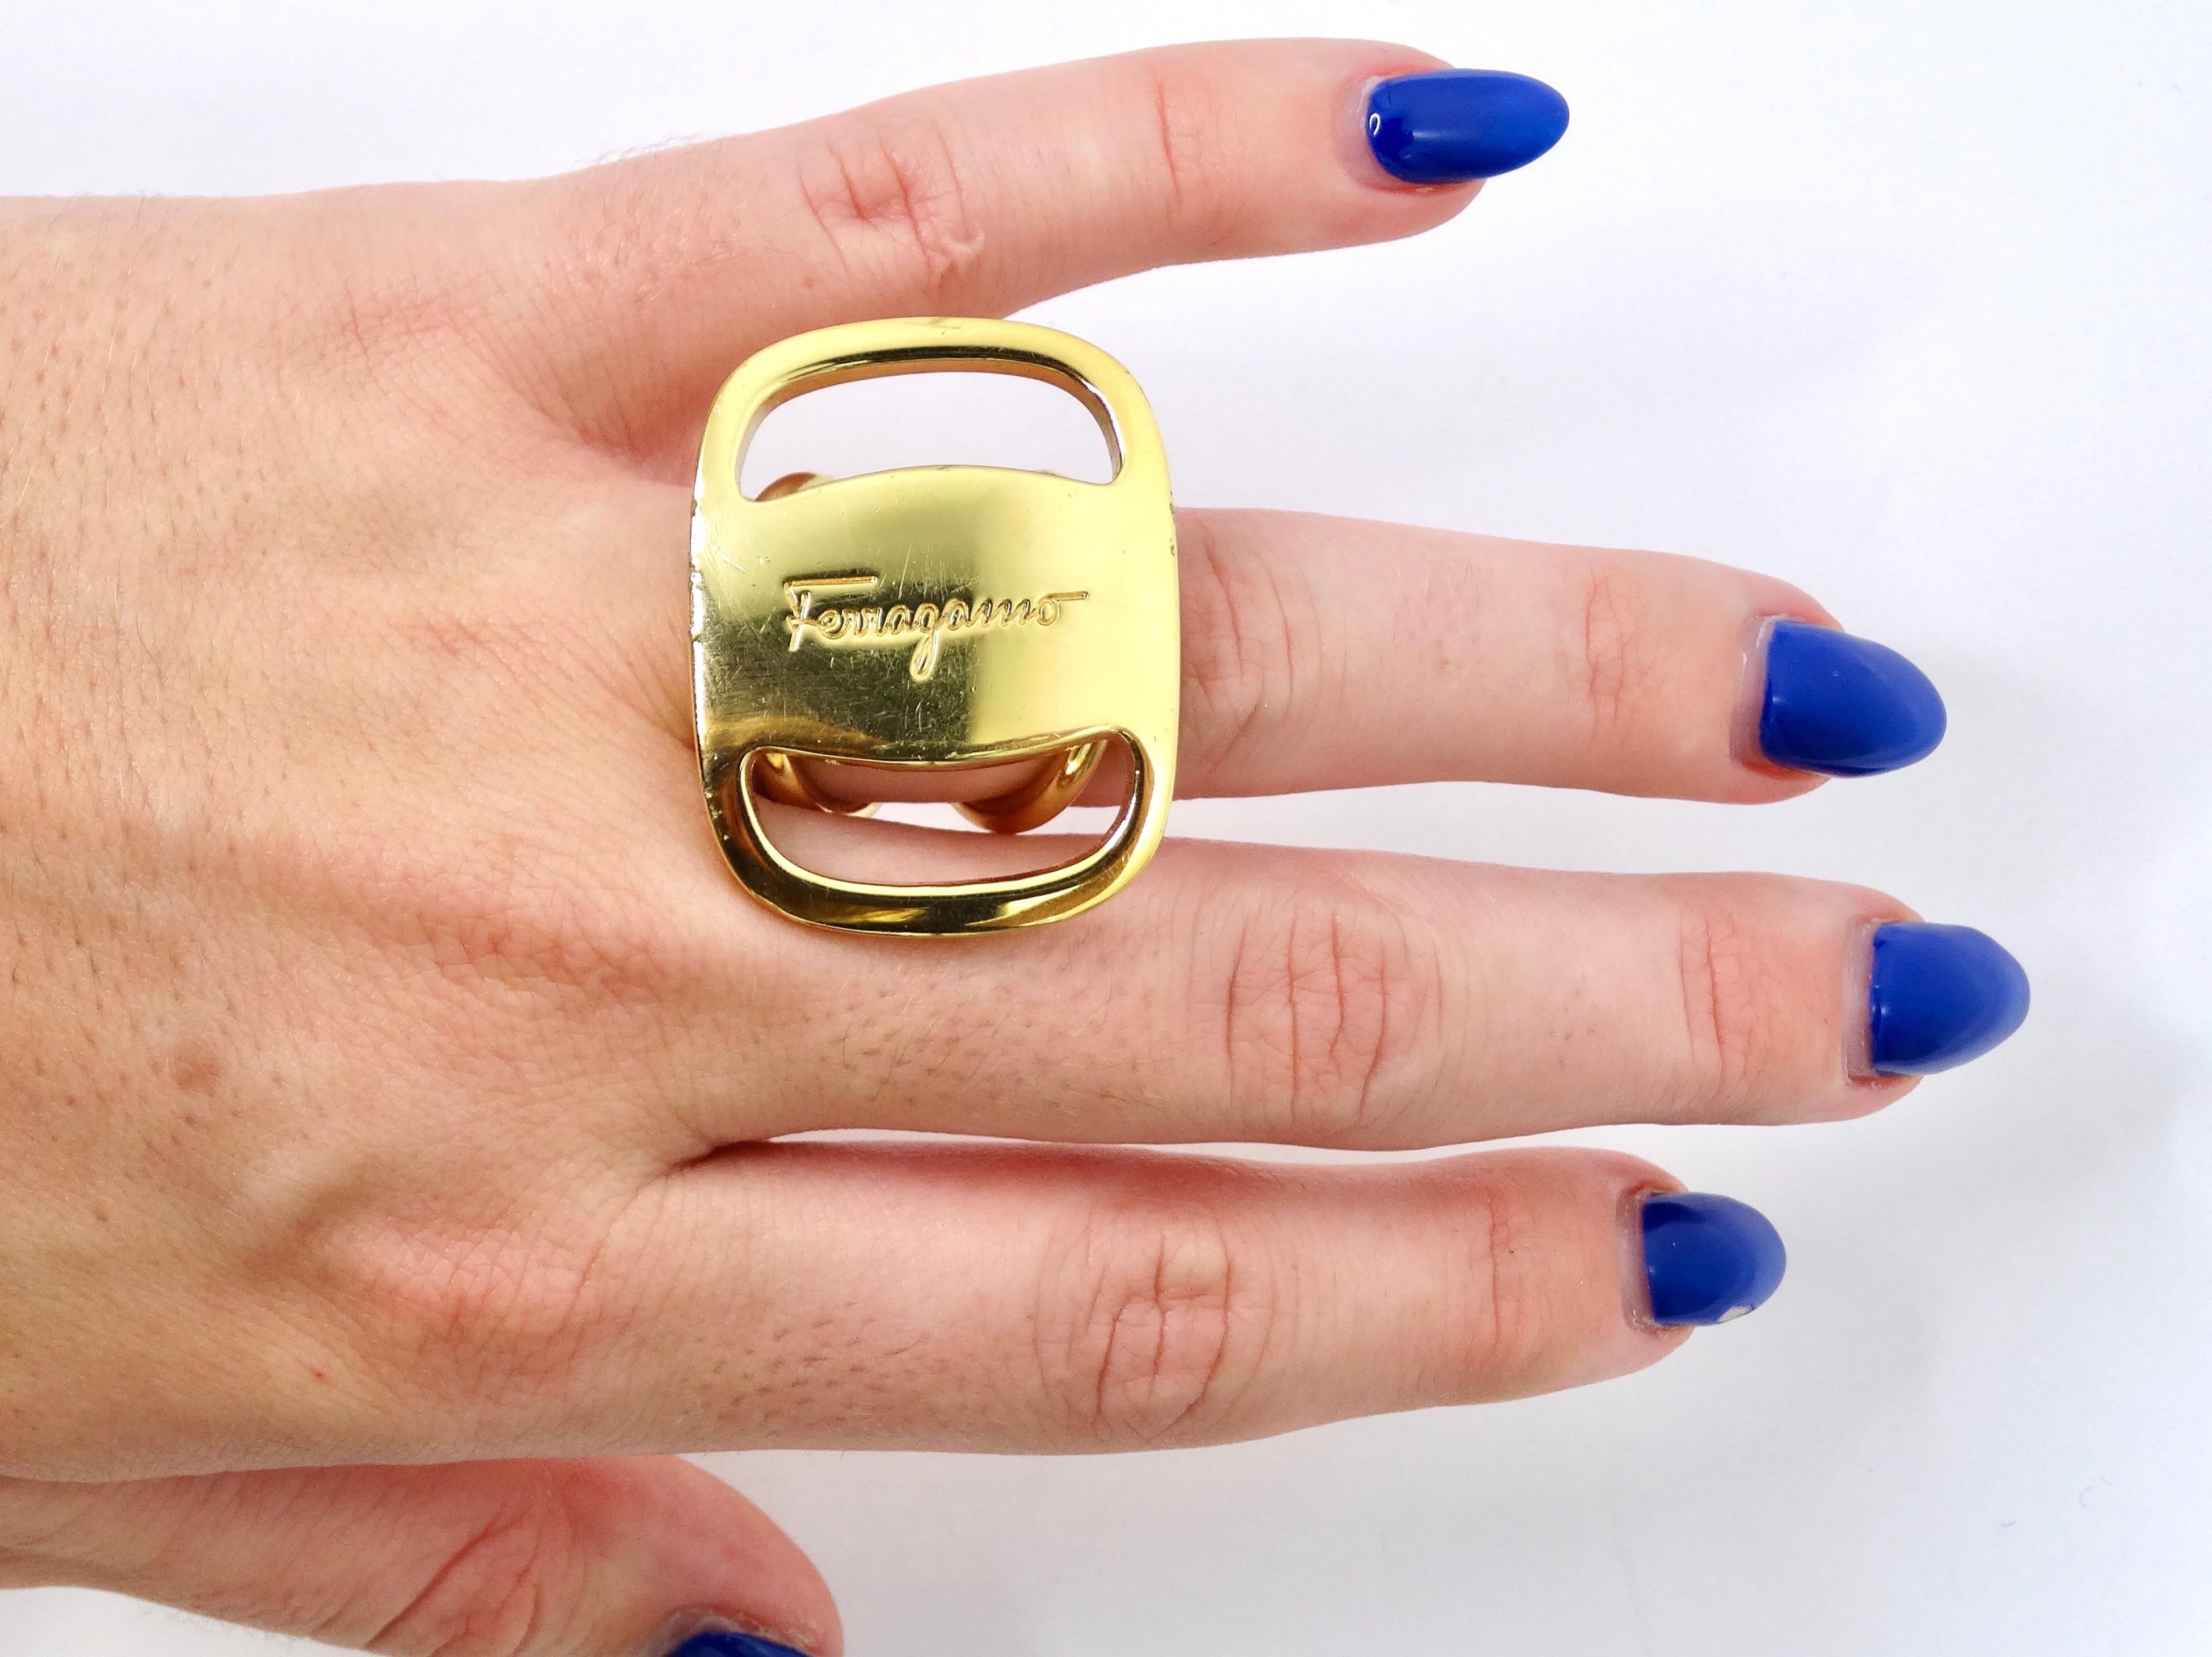 Snag this ultra-fashion forward Ferragamo ring! This is made to make a statement. This can be worn as a ring on your hand or used as a scarf ring. Everyone loves a versatile piece! This is made out of a vibrant gold metal with little imperfections